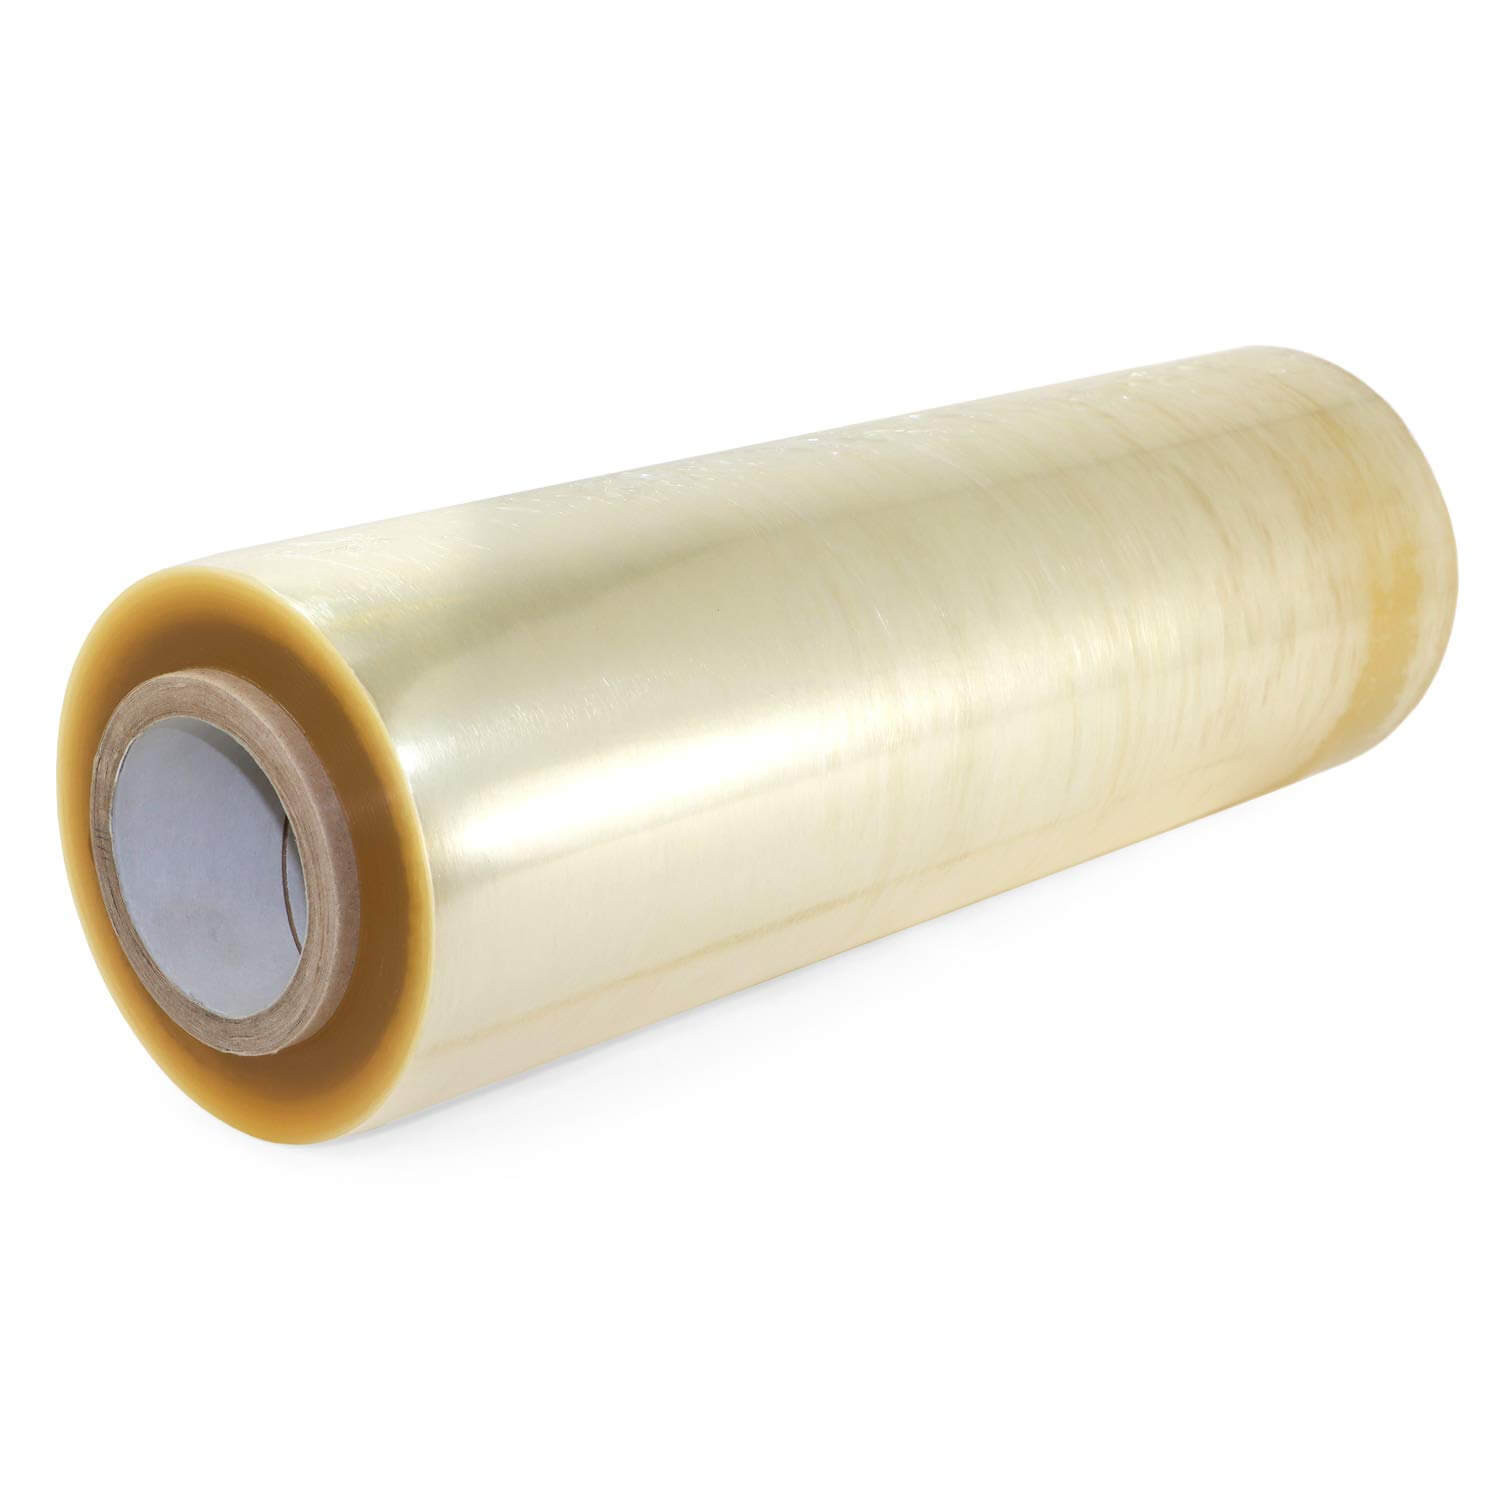 18 x 1000' White 50 lb. Butcher Paper Roll by Colorations